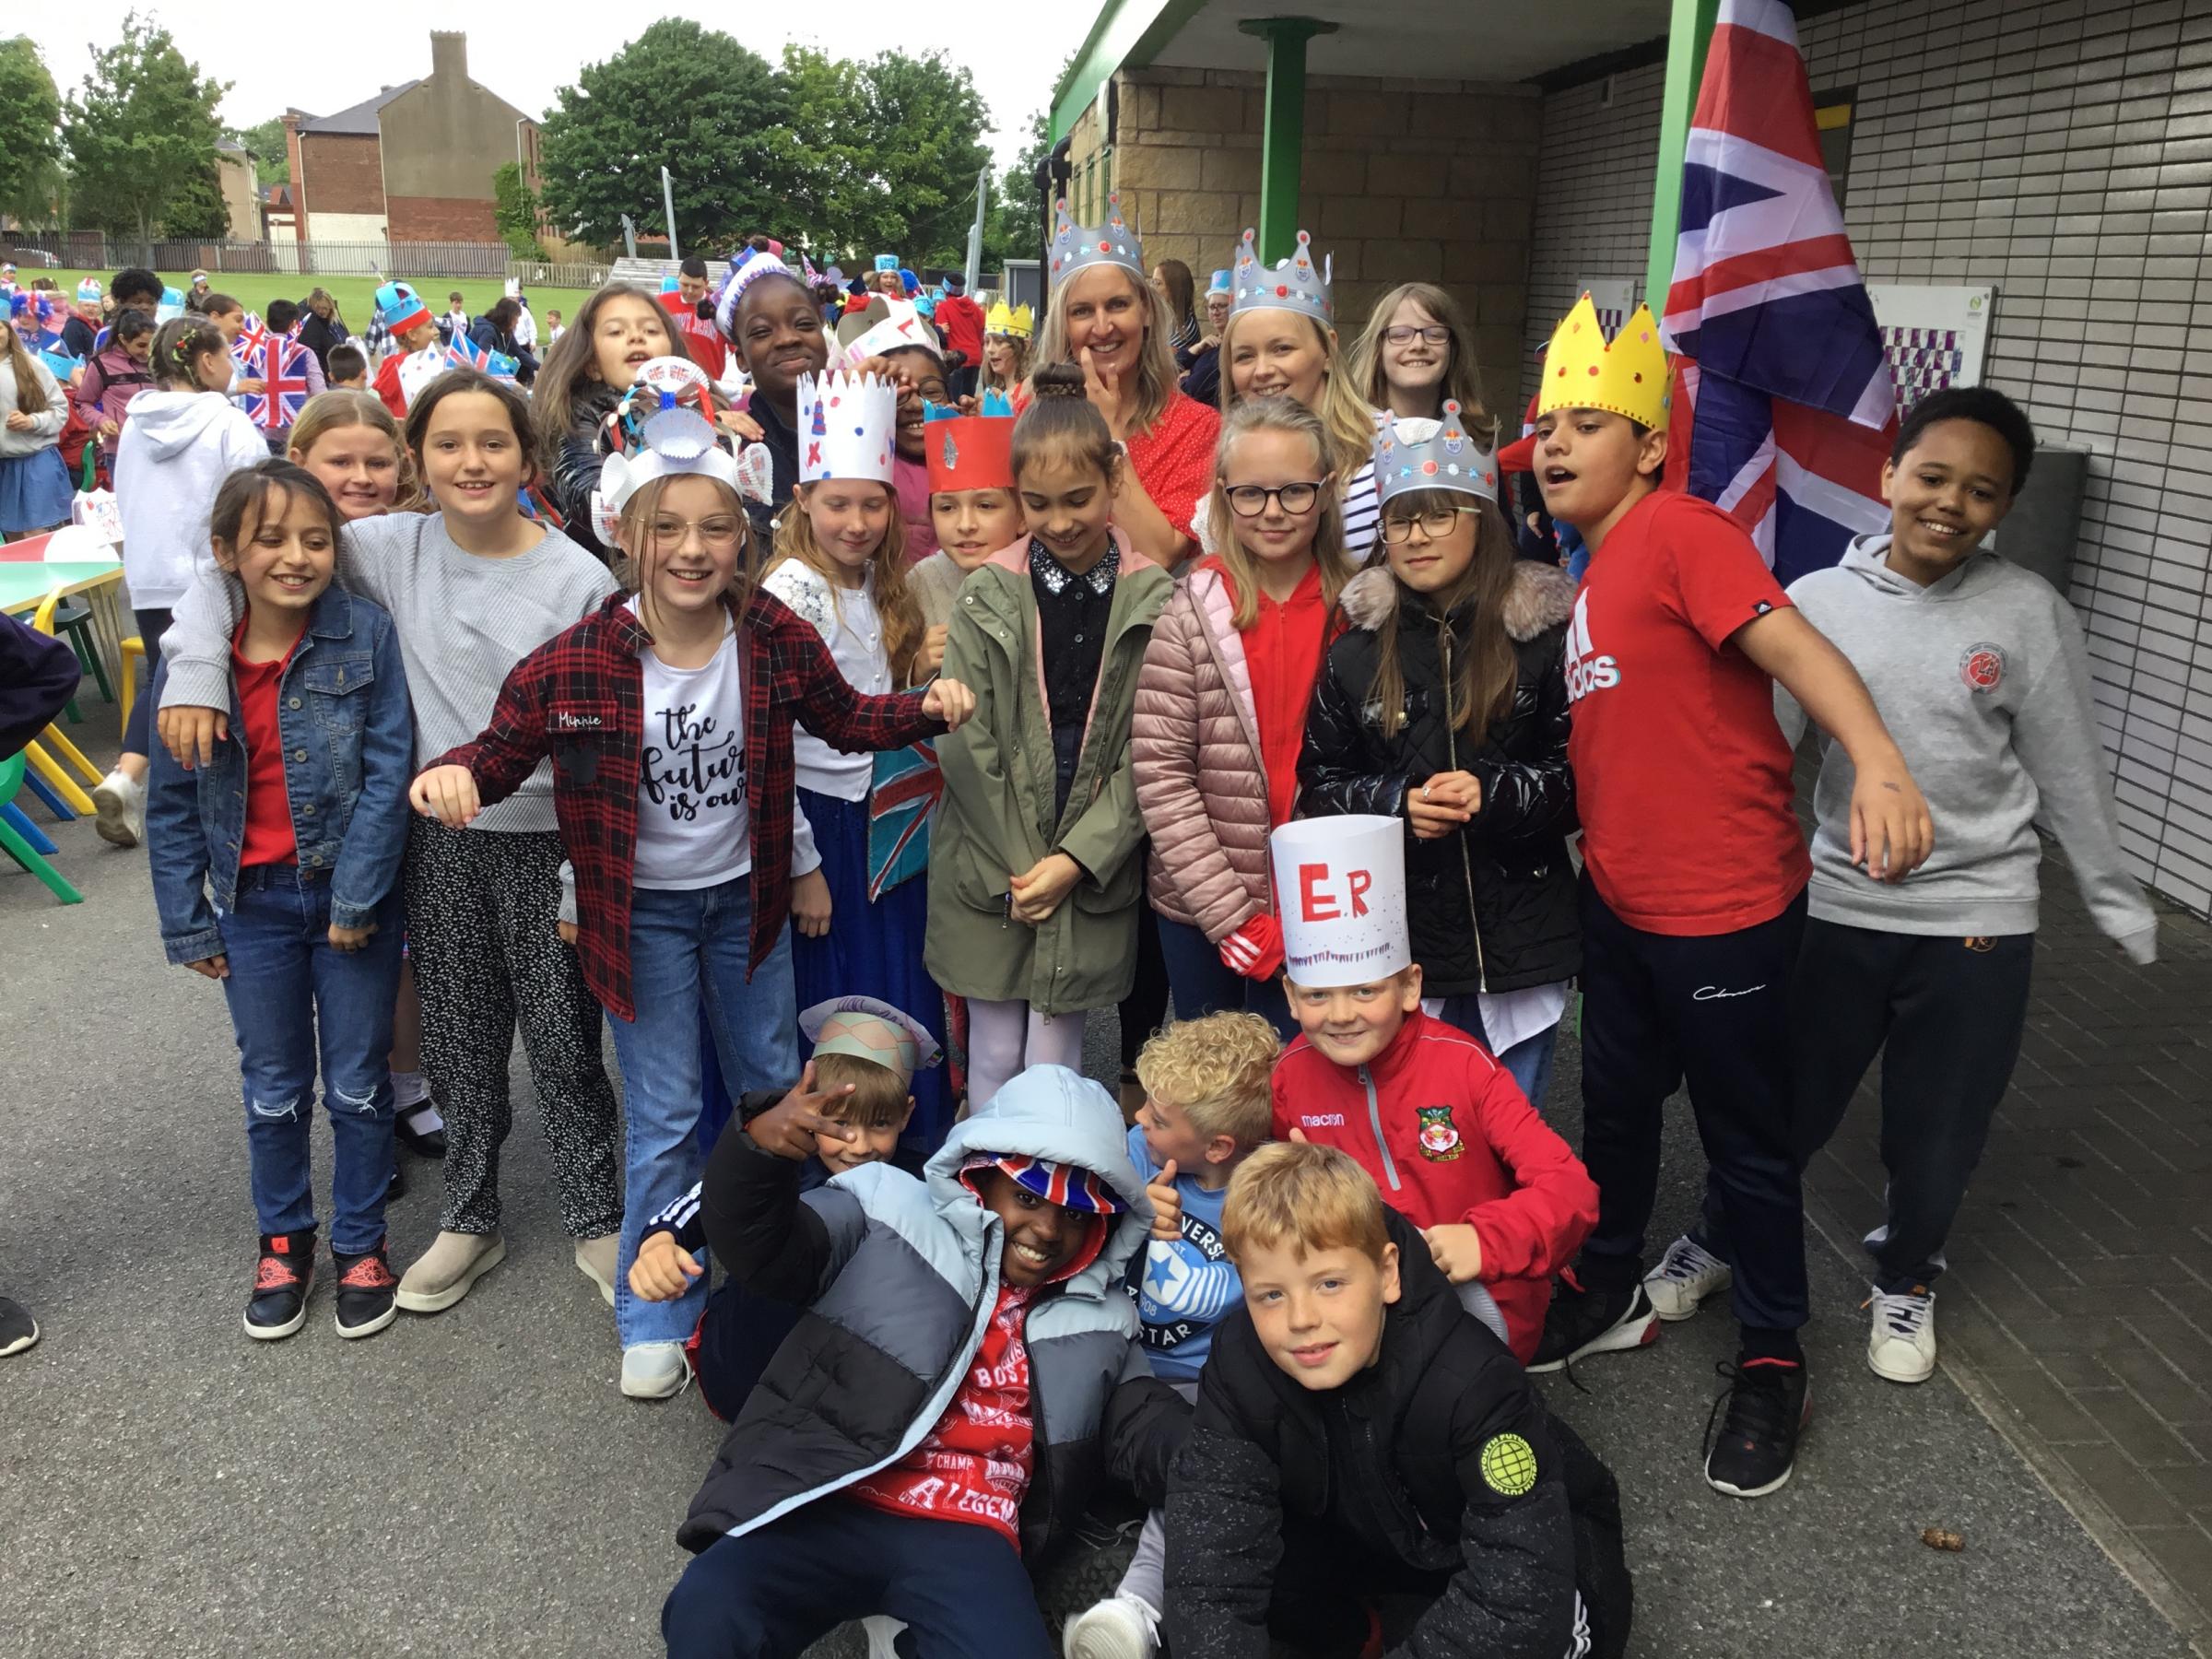 Jubilee street party fun at St Giles Primary School, Wrexham.